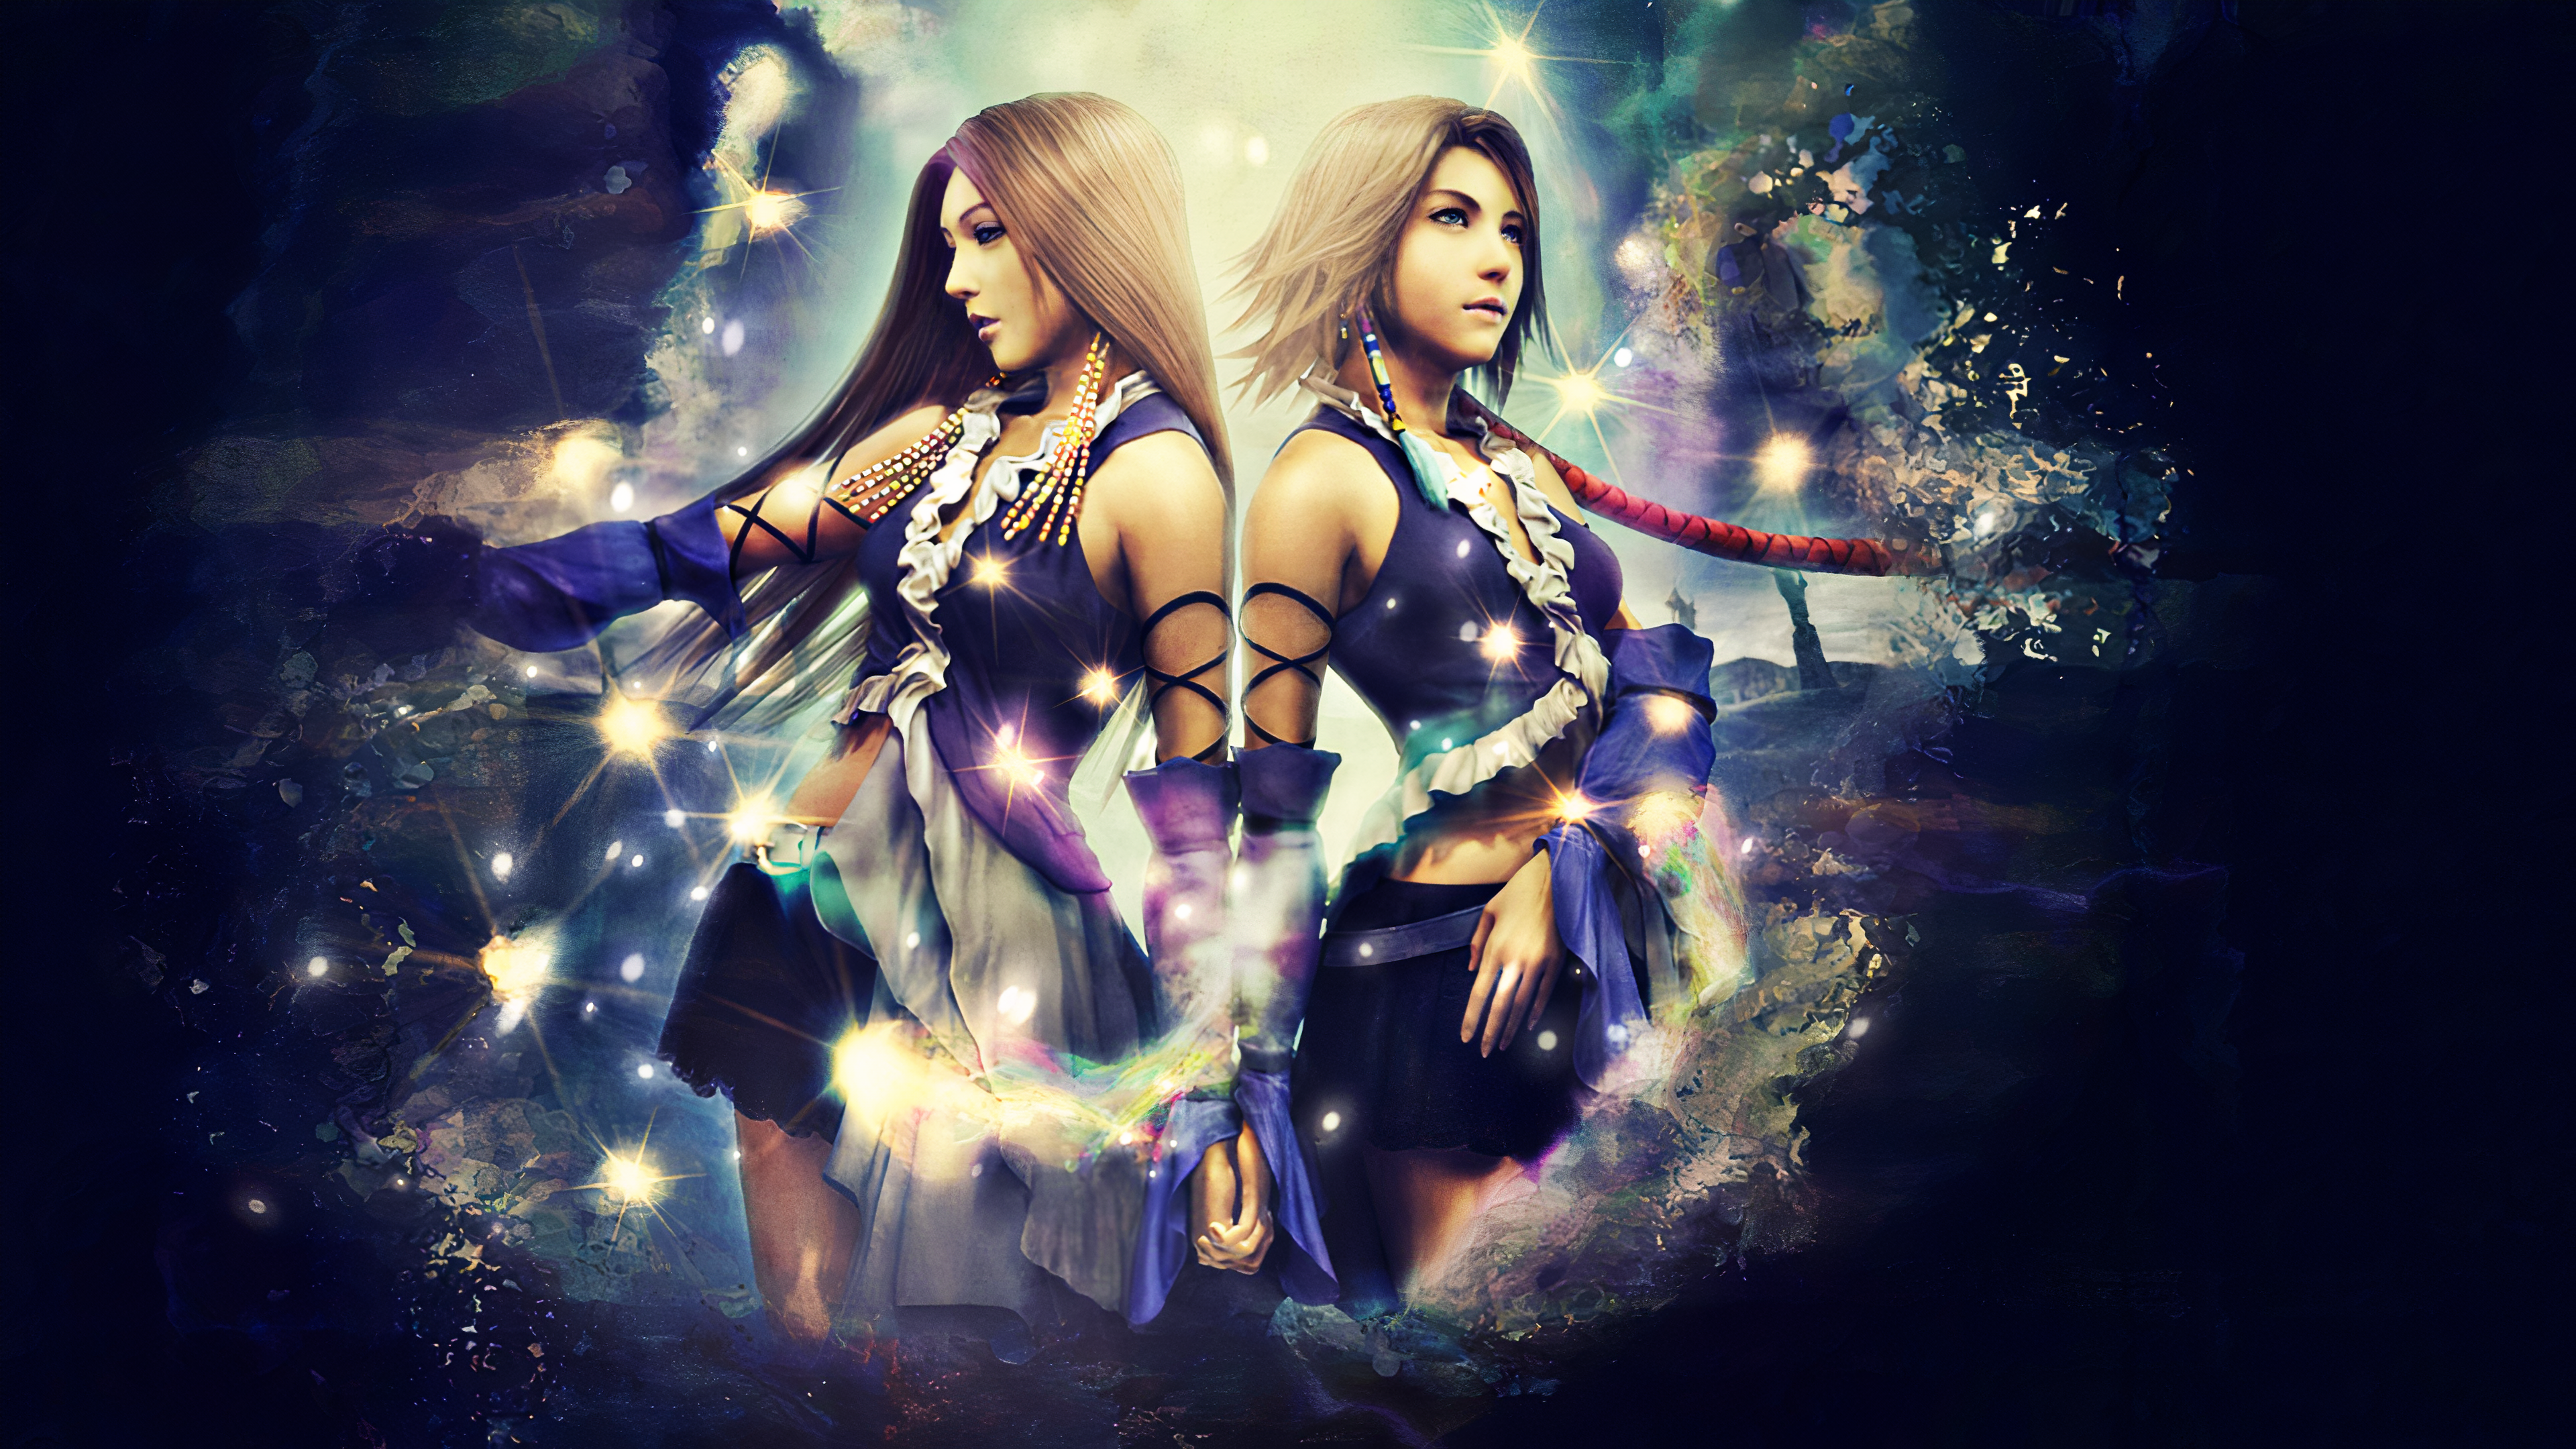 Video Game Final Fantasy X-2 HD Wallpaper | Background Image